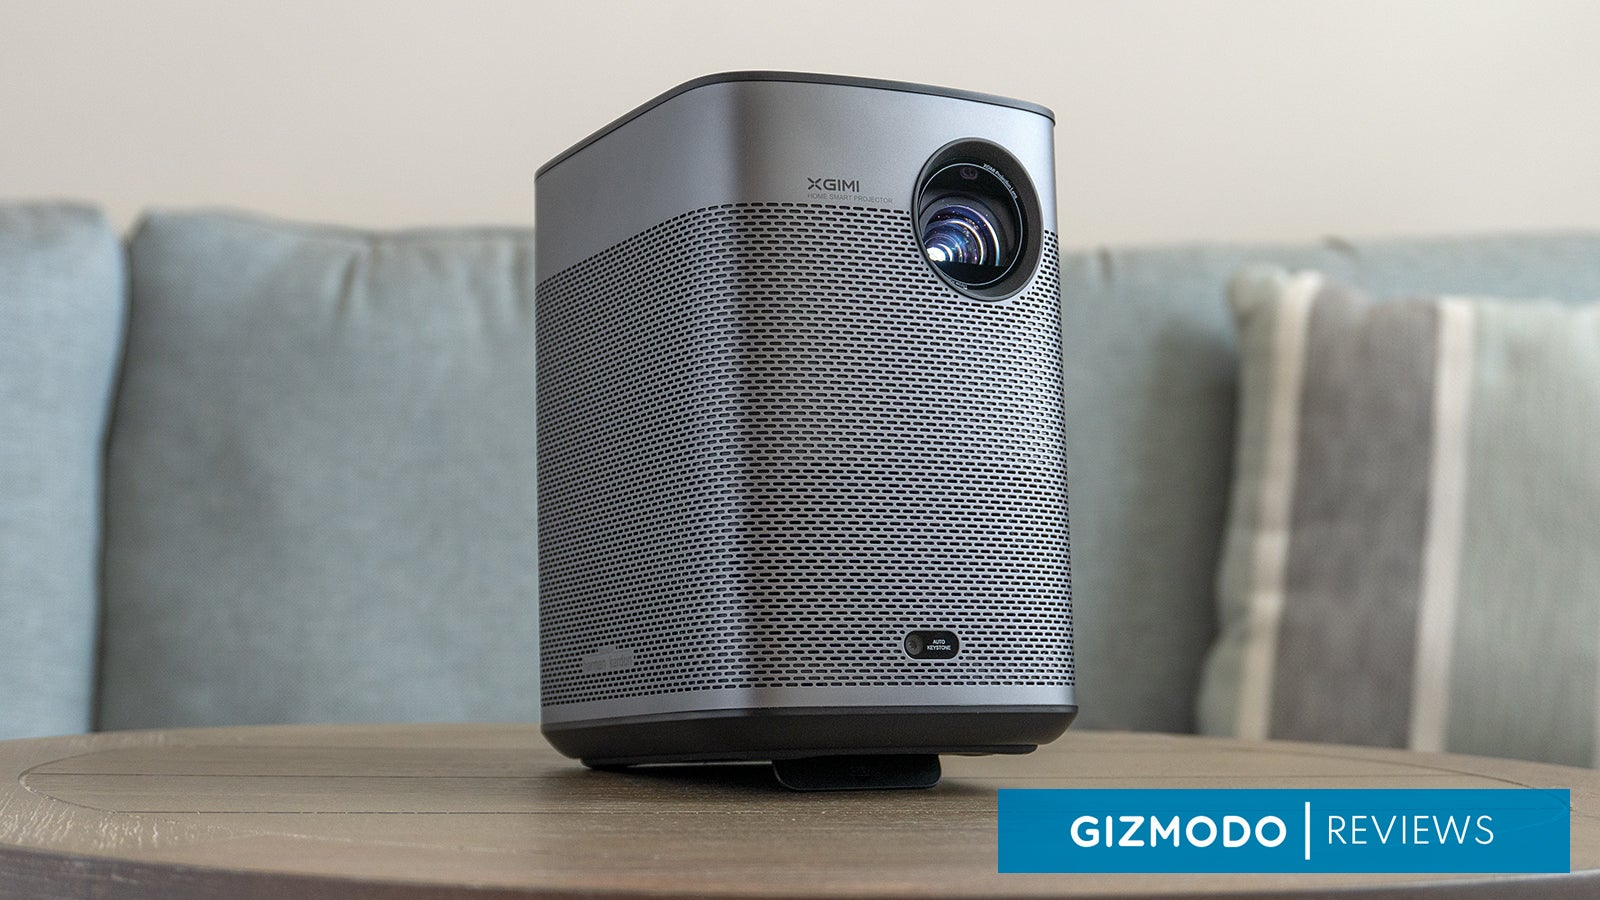 The Rechargeable XGIMI Halo+ Projector Will Glamp Up The Outdoors